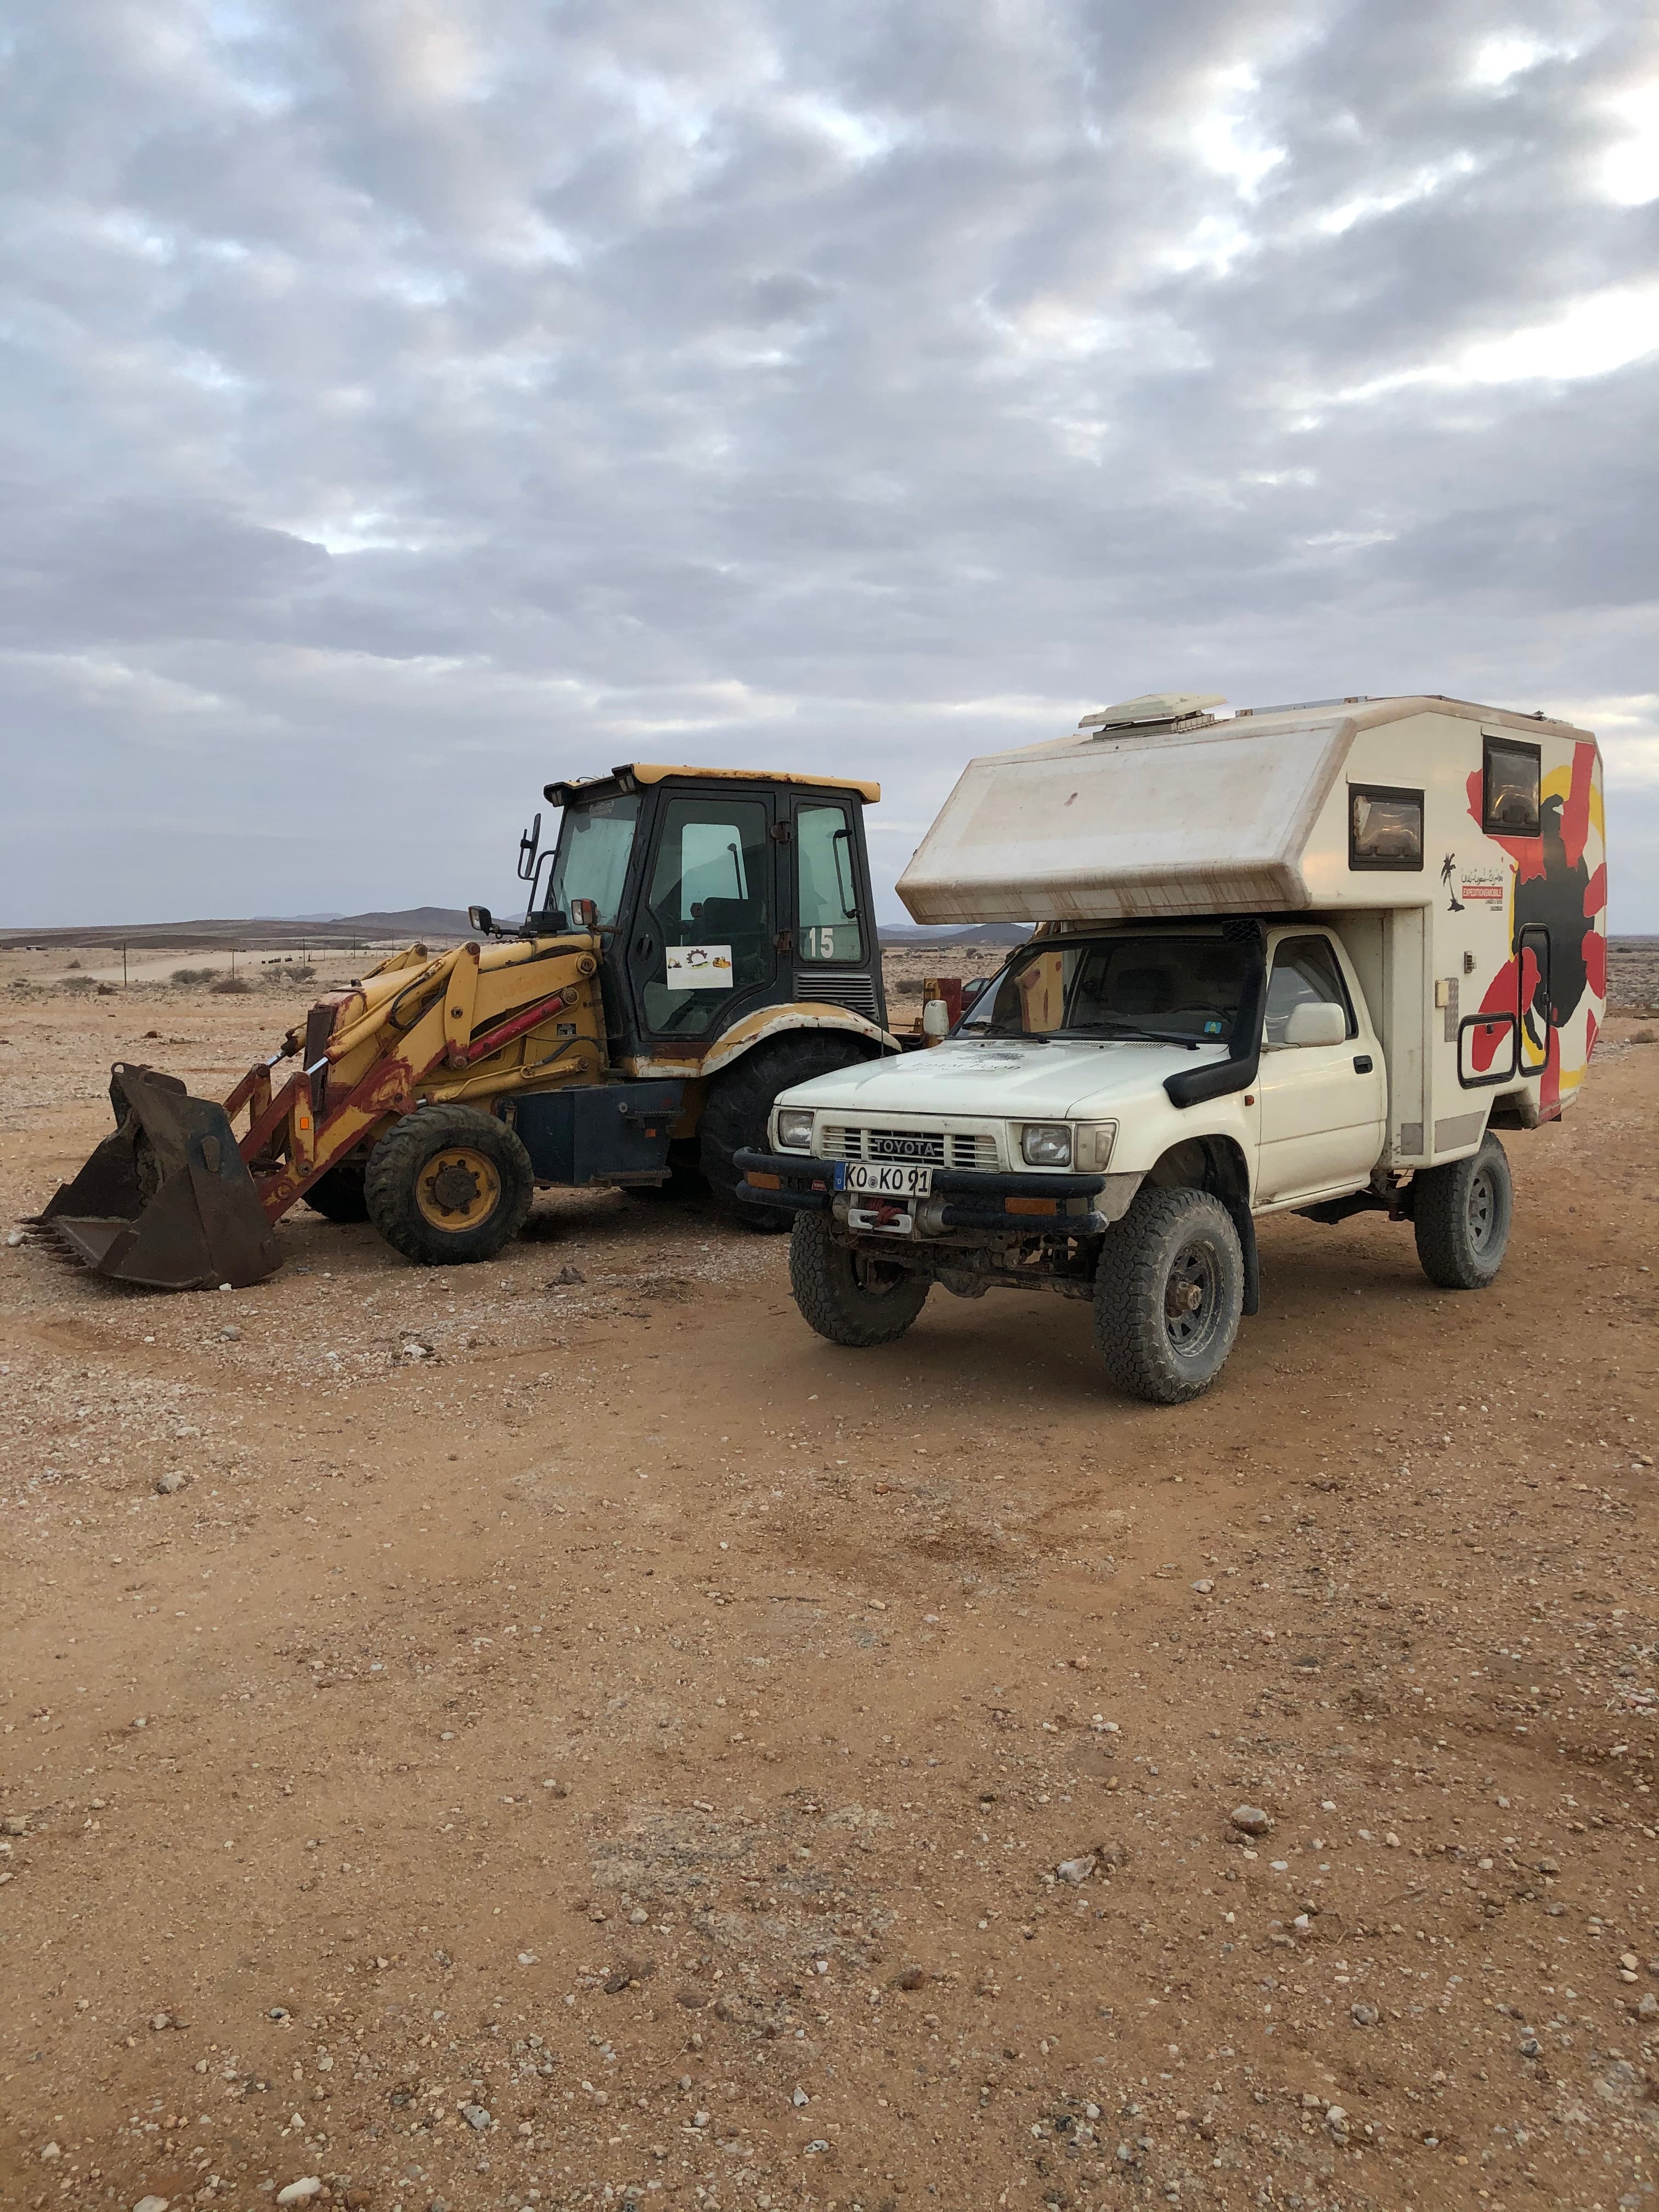 Desert overlanding in search of Namibia’s diverse mineral species